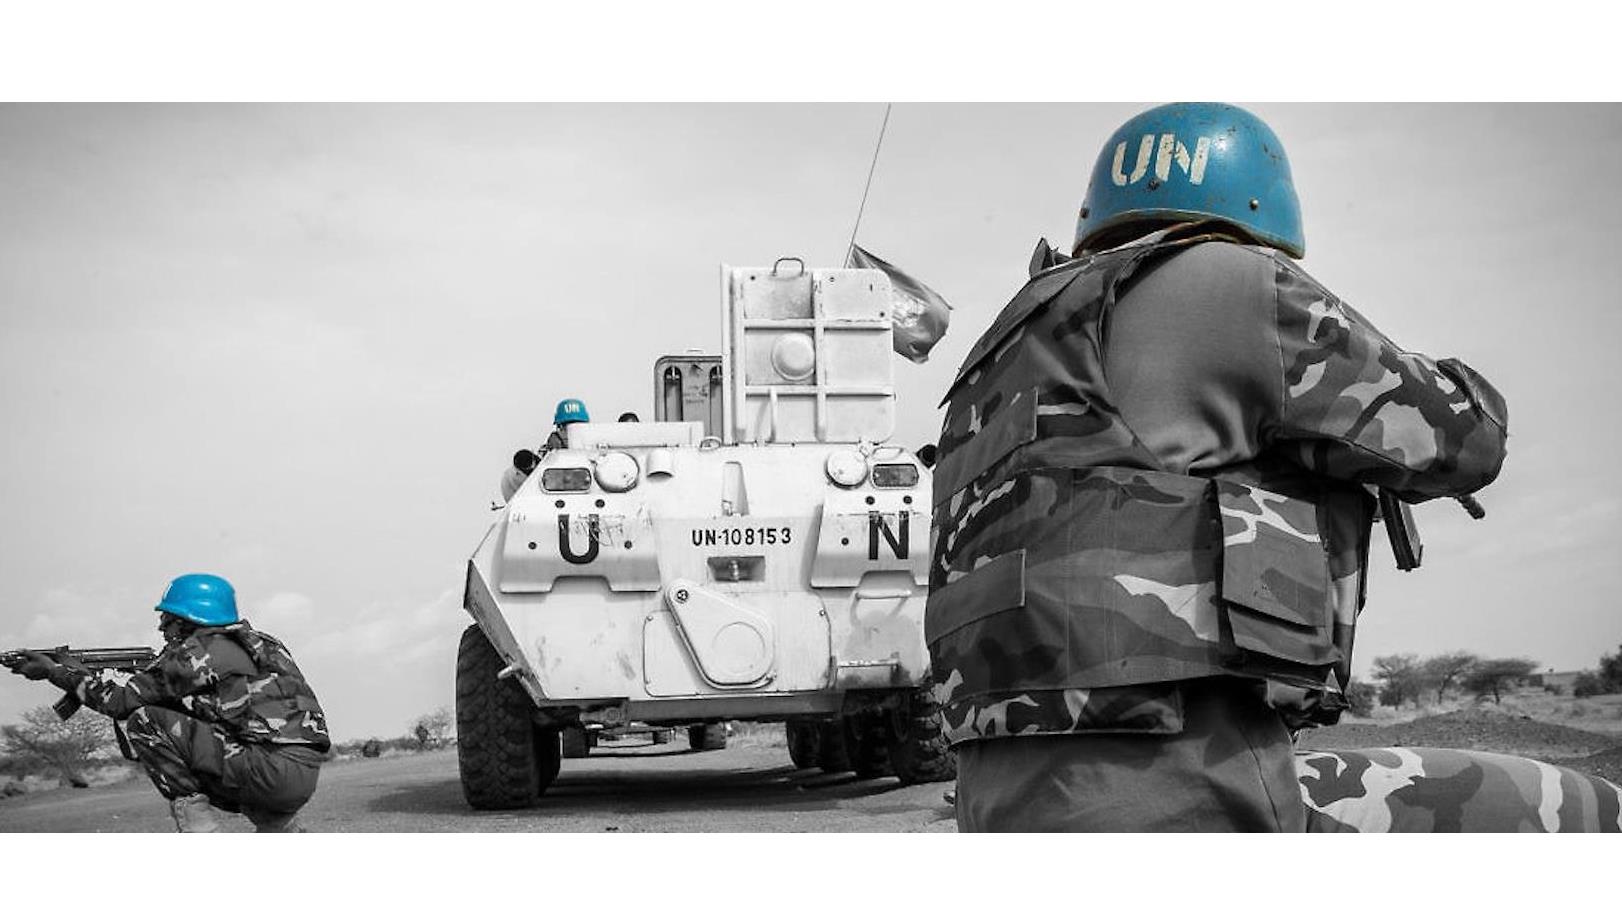 The United Nations And Peace: Aspiration or Illusion?